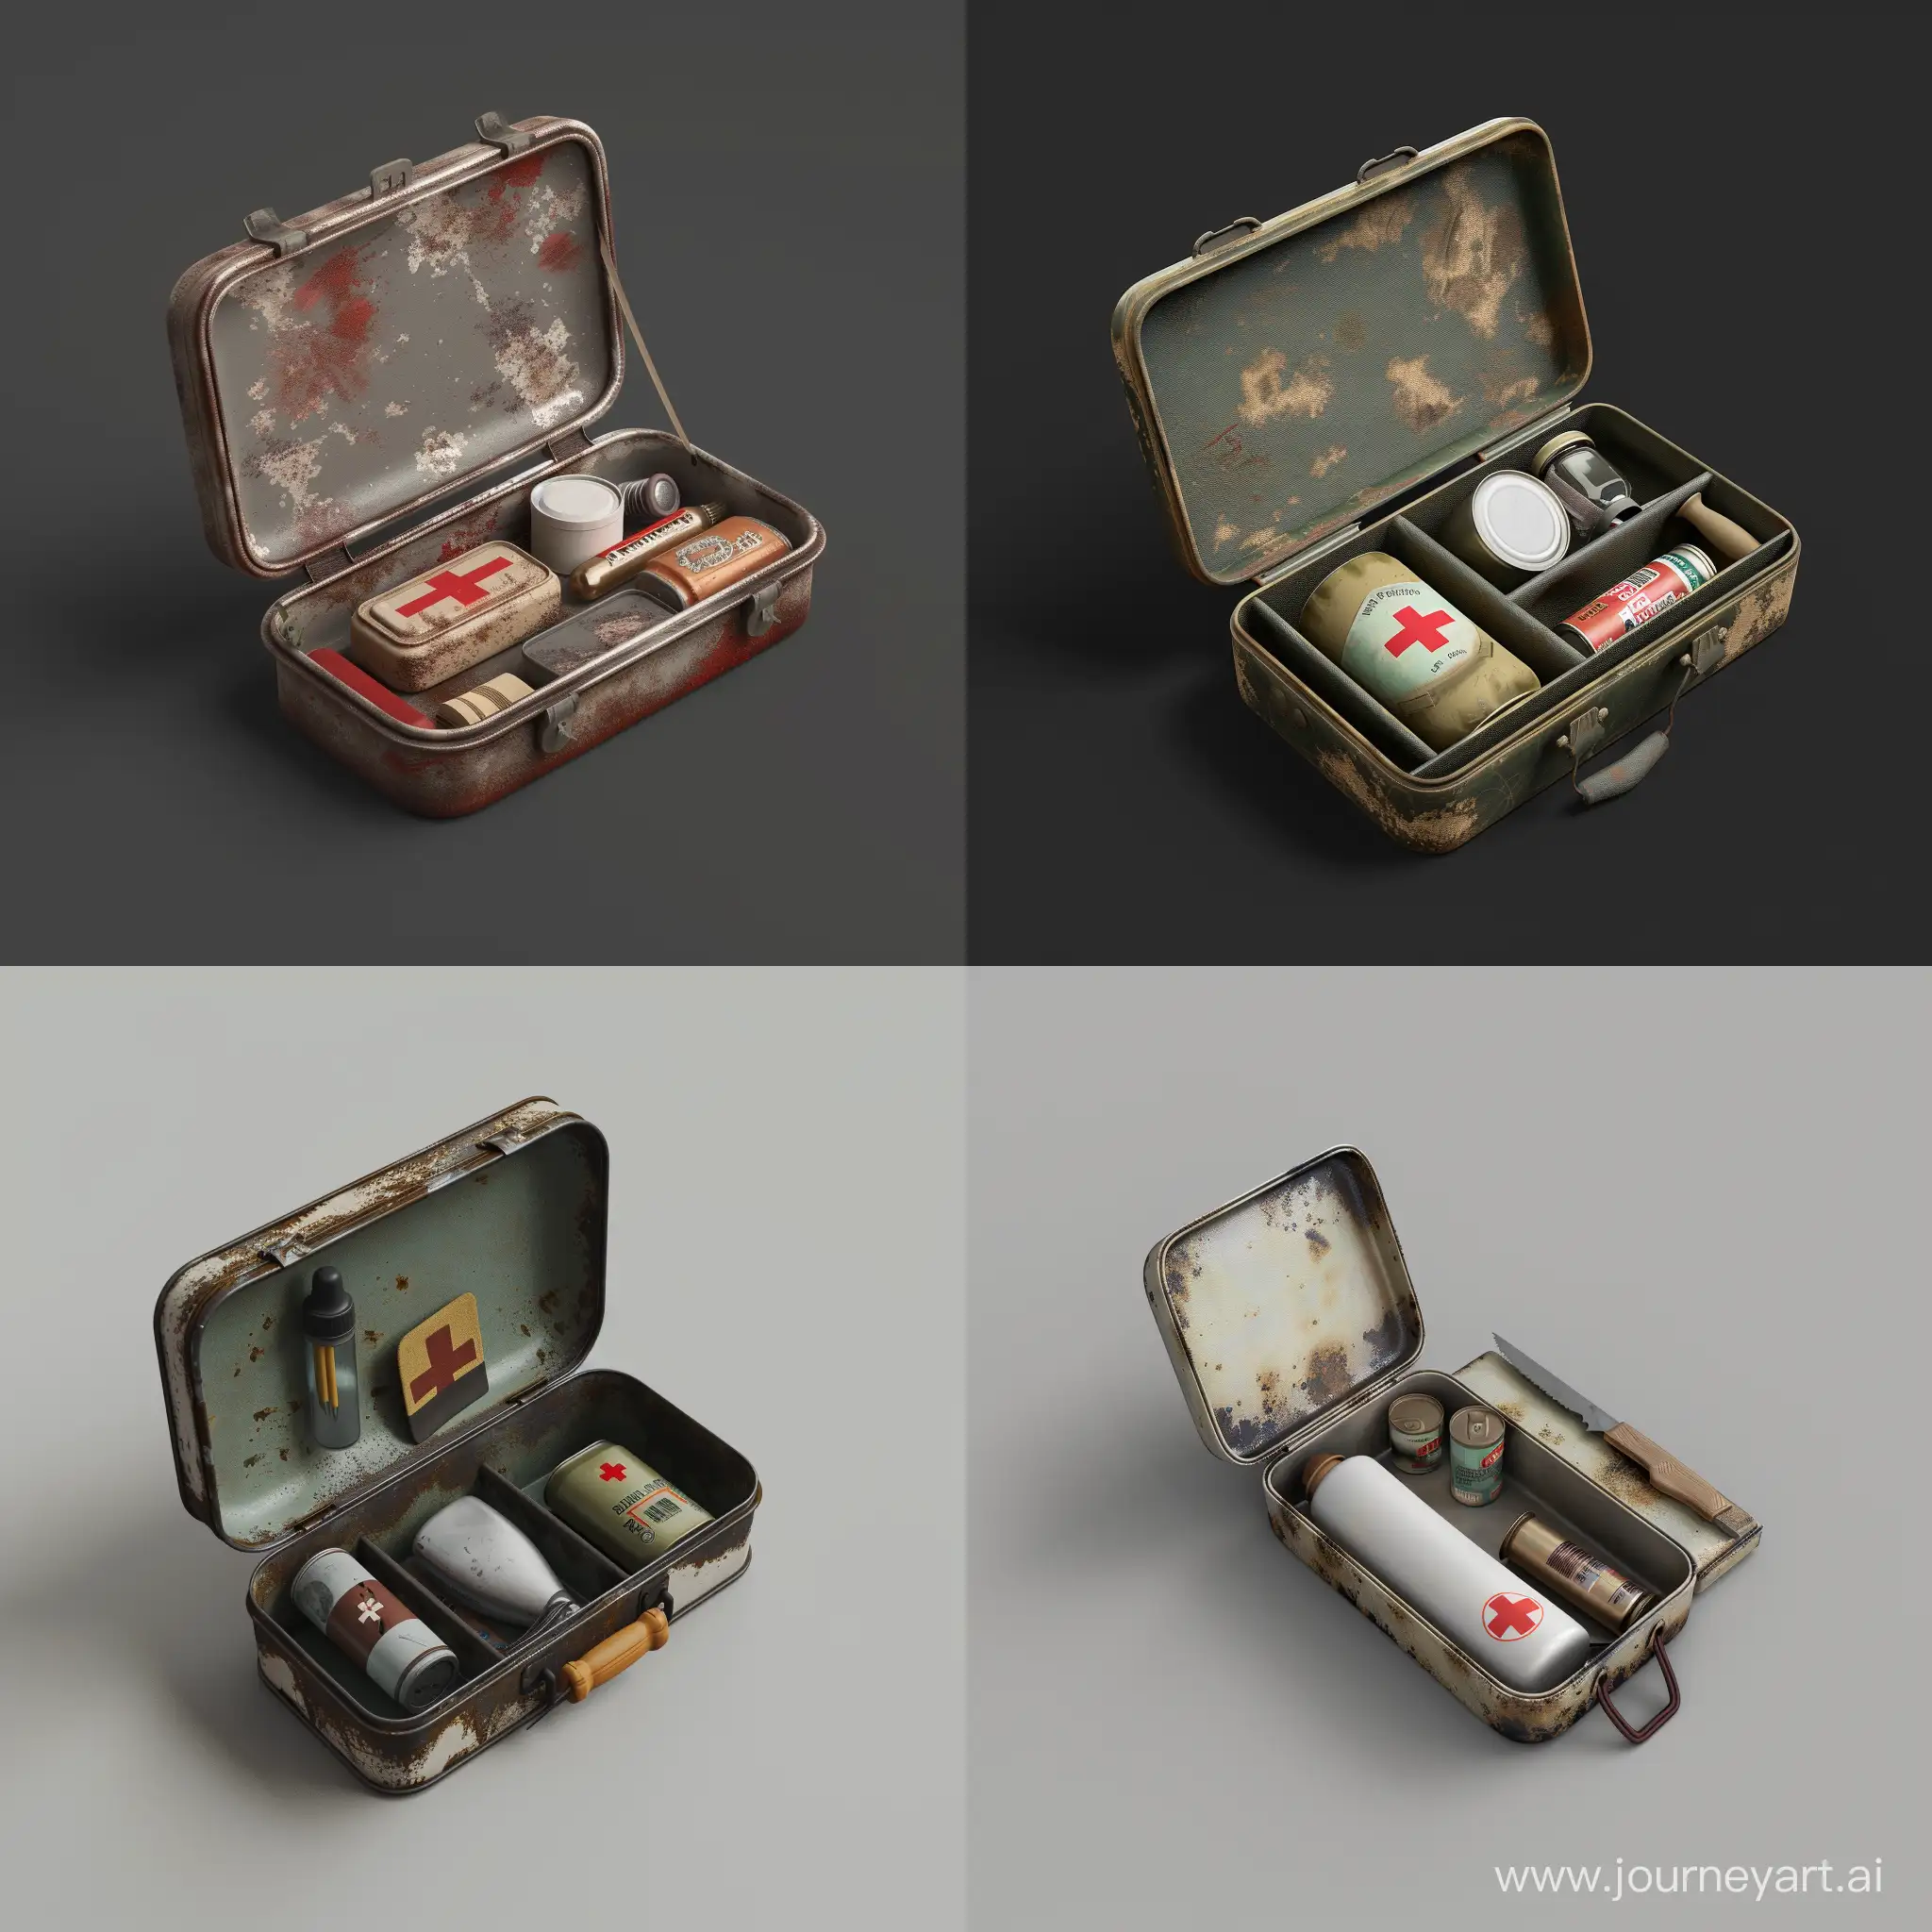 isometric realistic mini very small simple opened survival kit in realistic worn simple oblong metal case, 3d render, stalker style, less details, hunting first aid, hygiene, canned